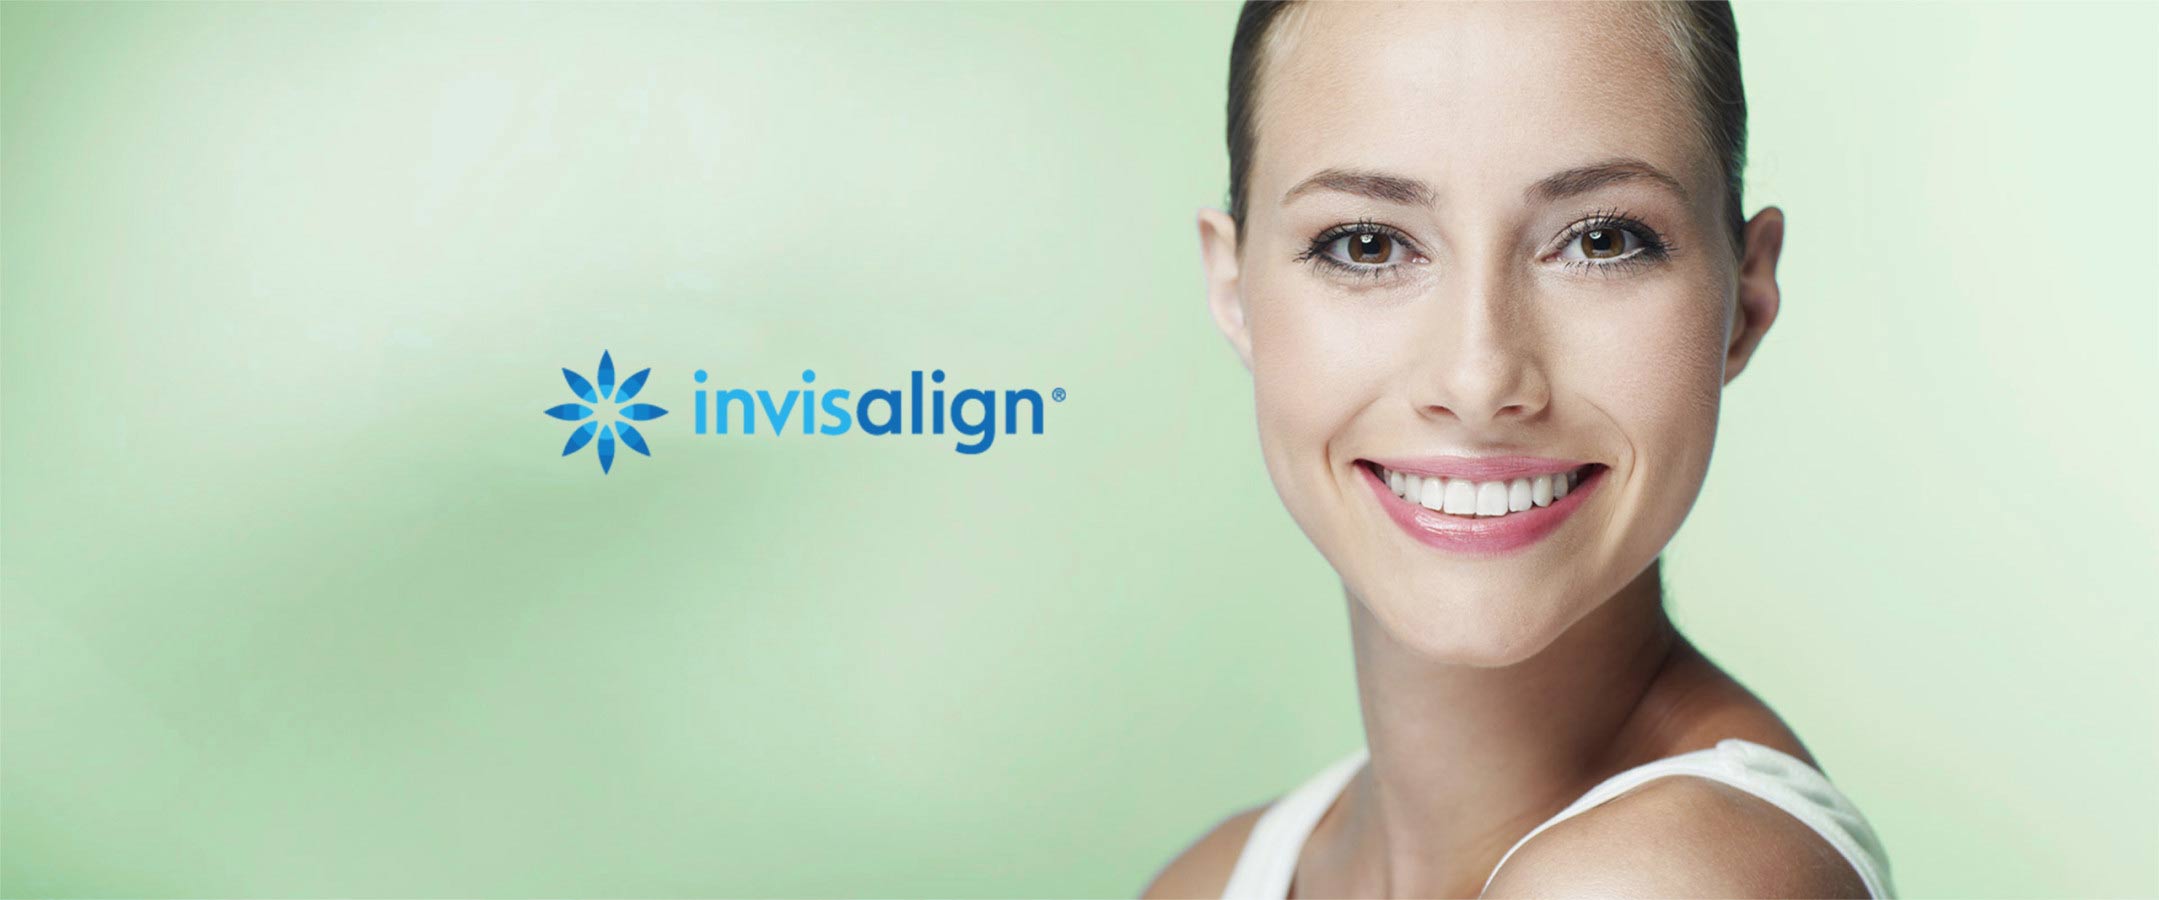 Invisalign For Adults in Suwanee & Cumming